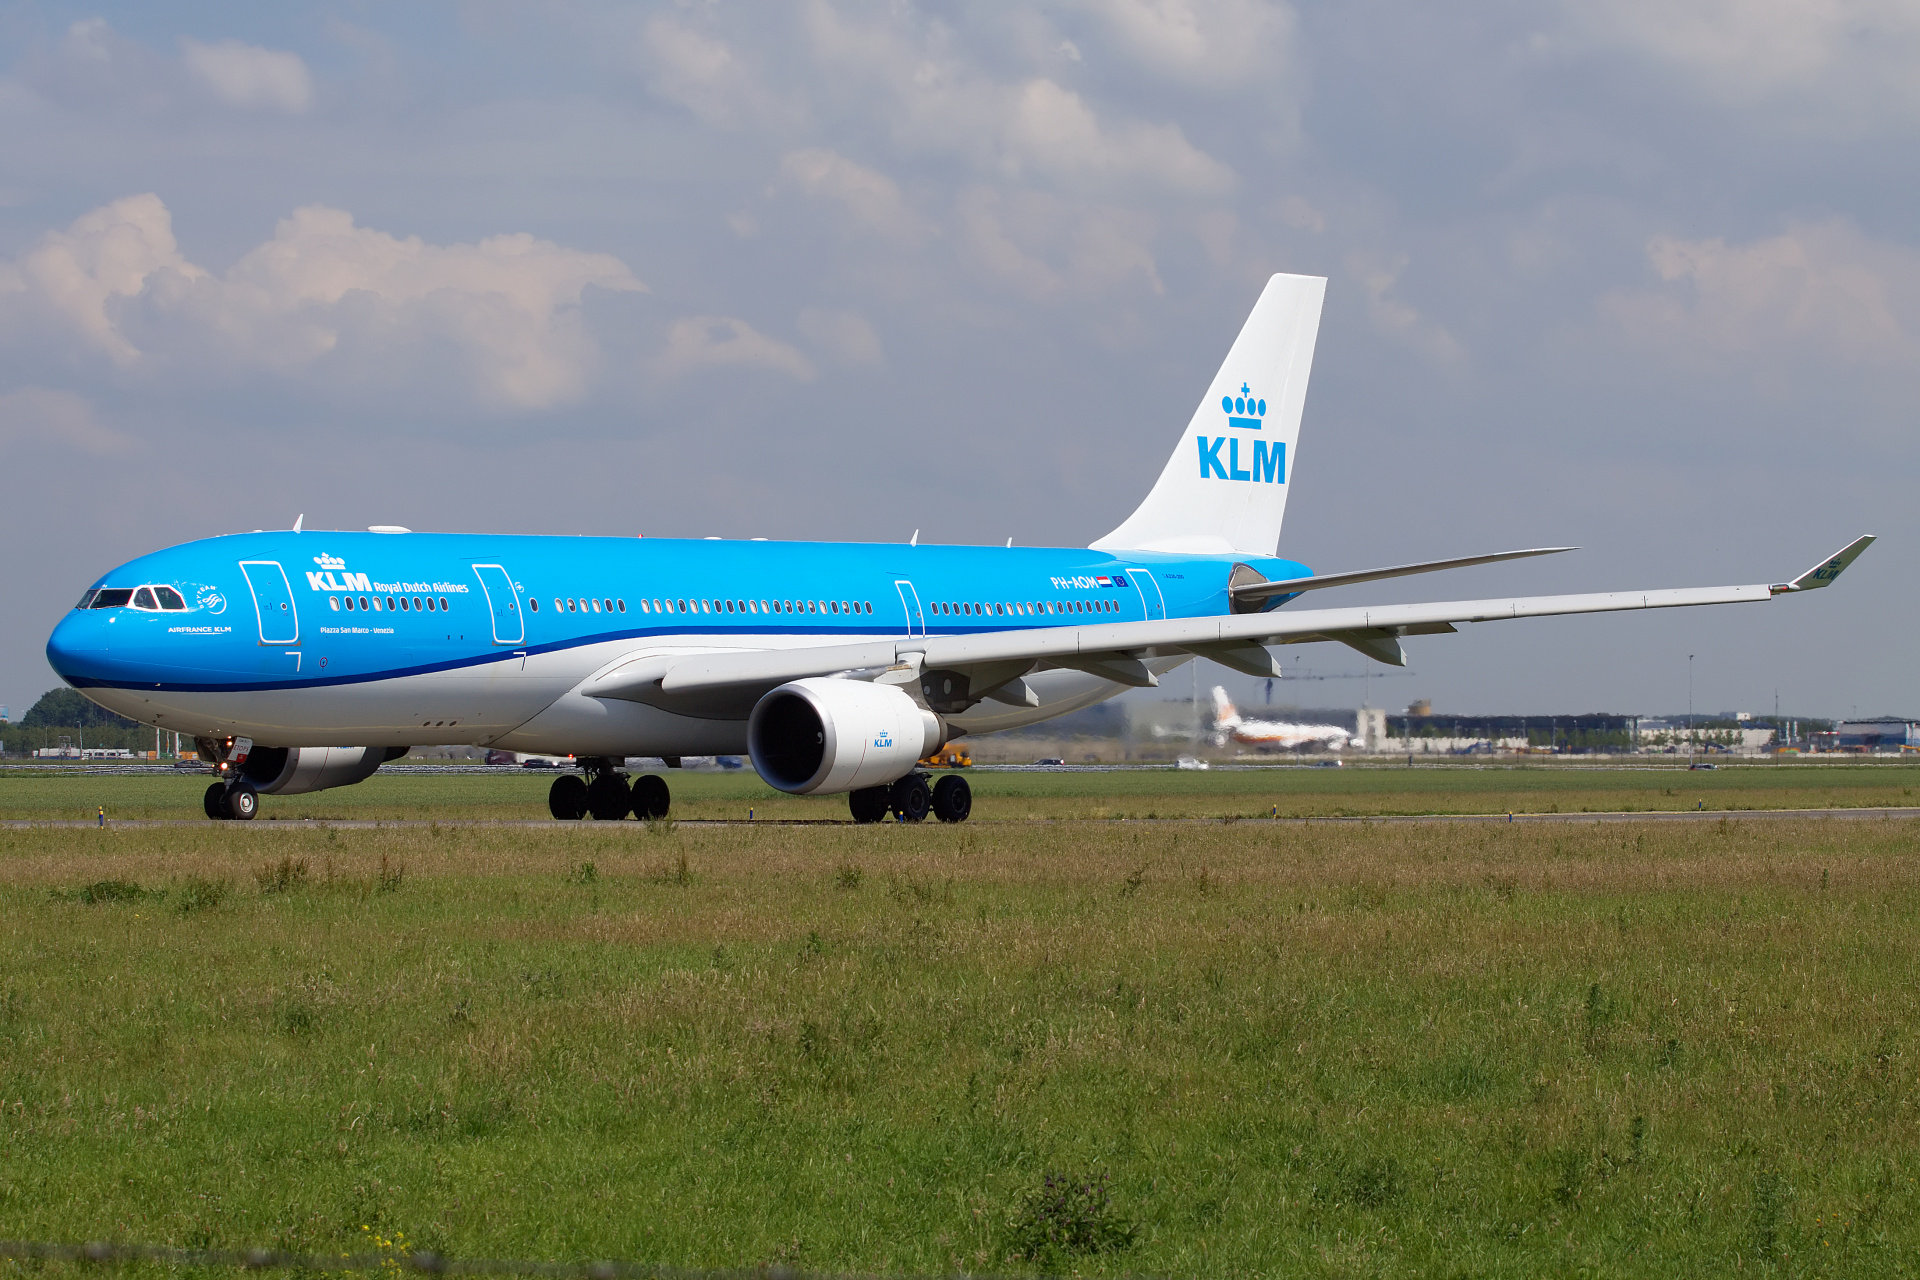 PH-AOM (Aircraft » Schiphol Spotting » Airbus A330-200 » KLM Royal Dutch Airlines)